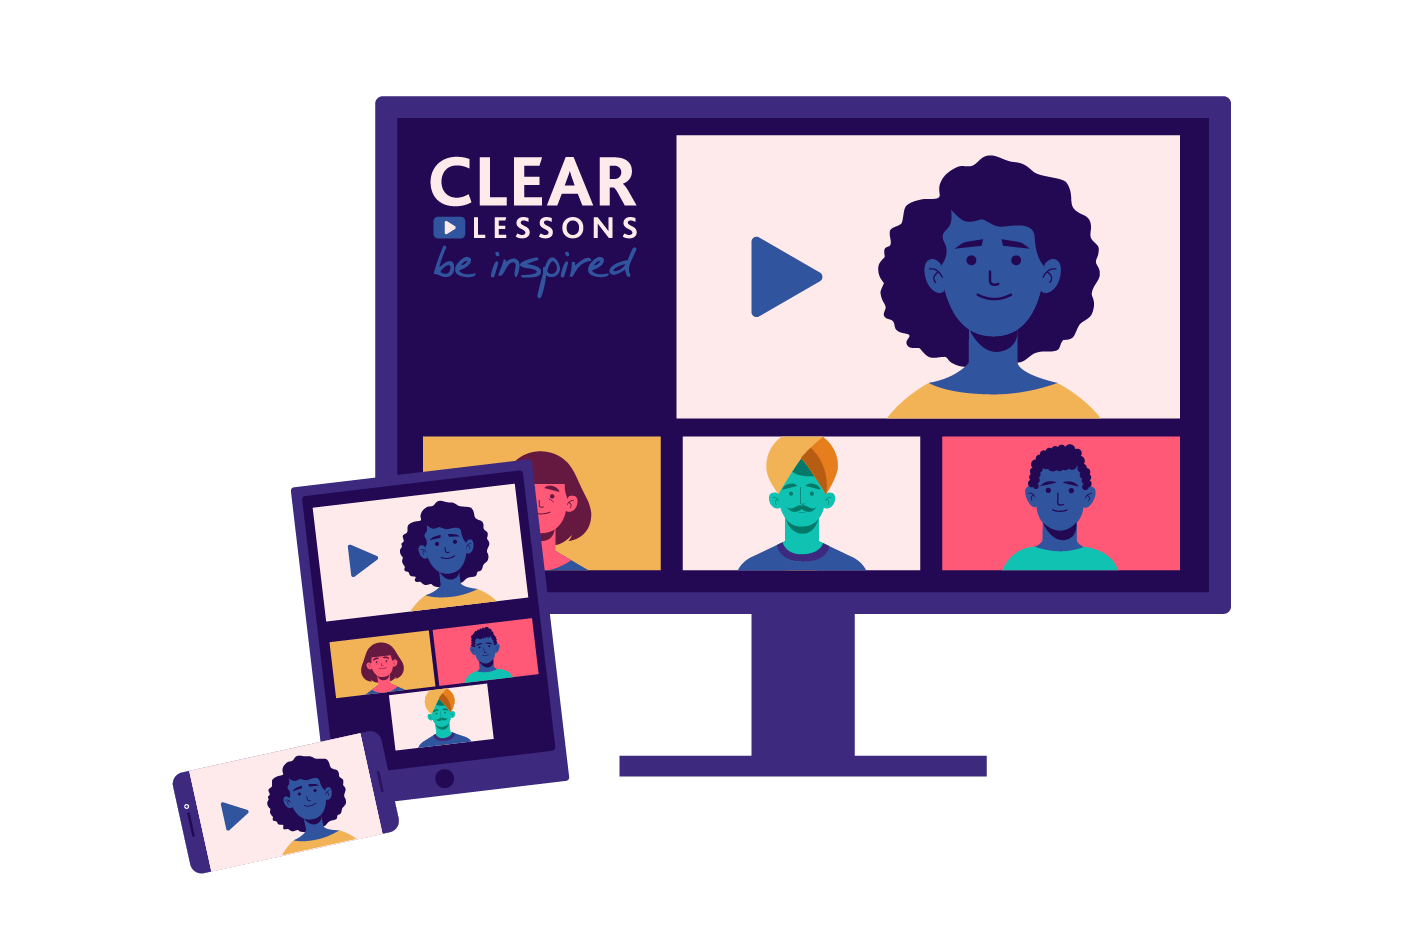 Desktop, tablet and mobile screens displaying Clear Lessons videos